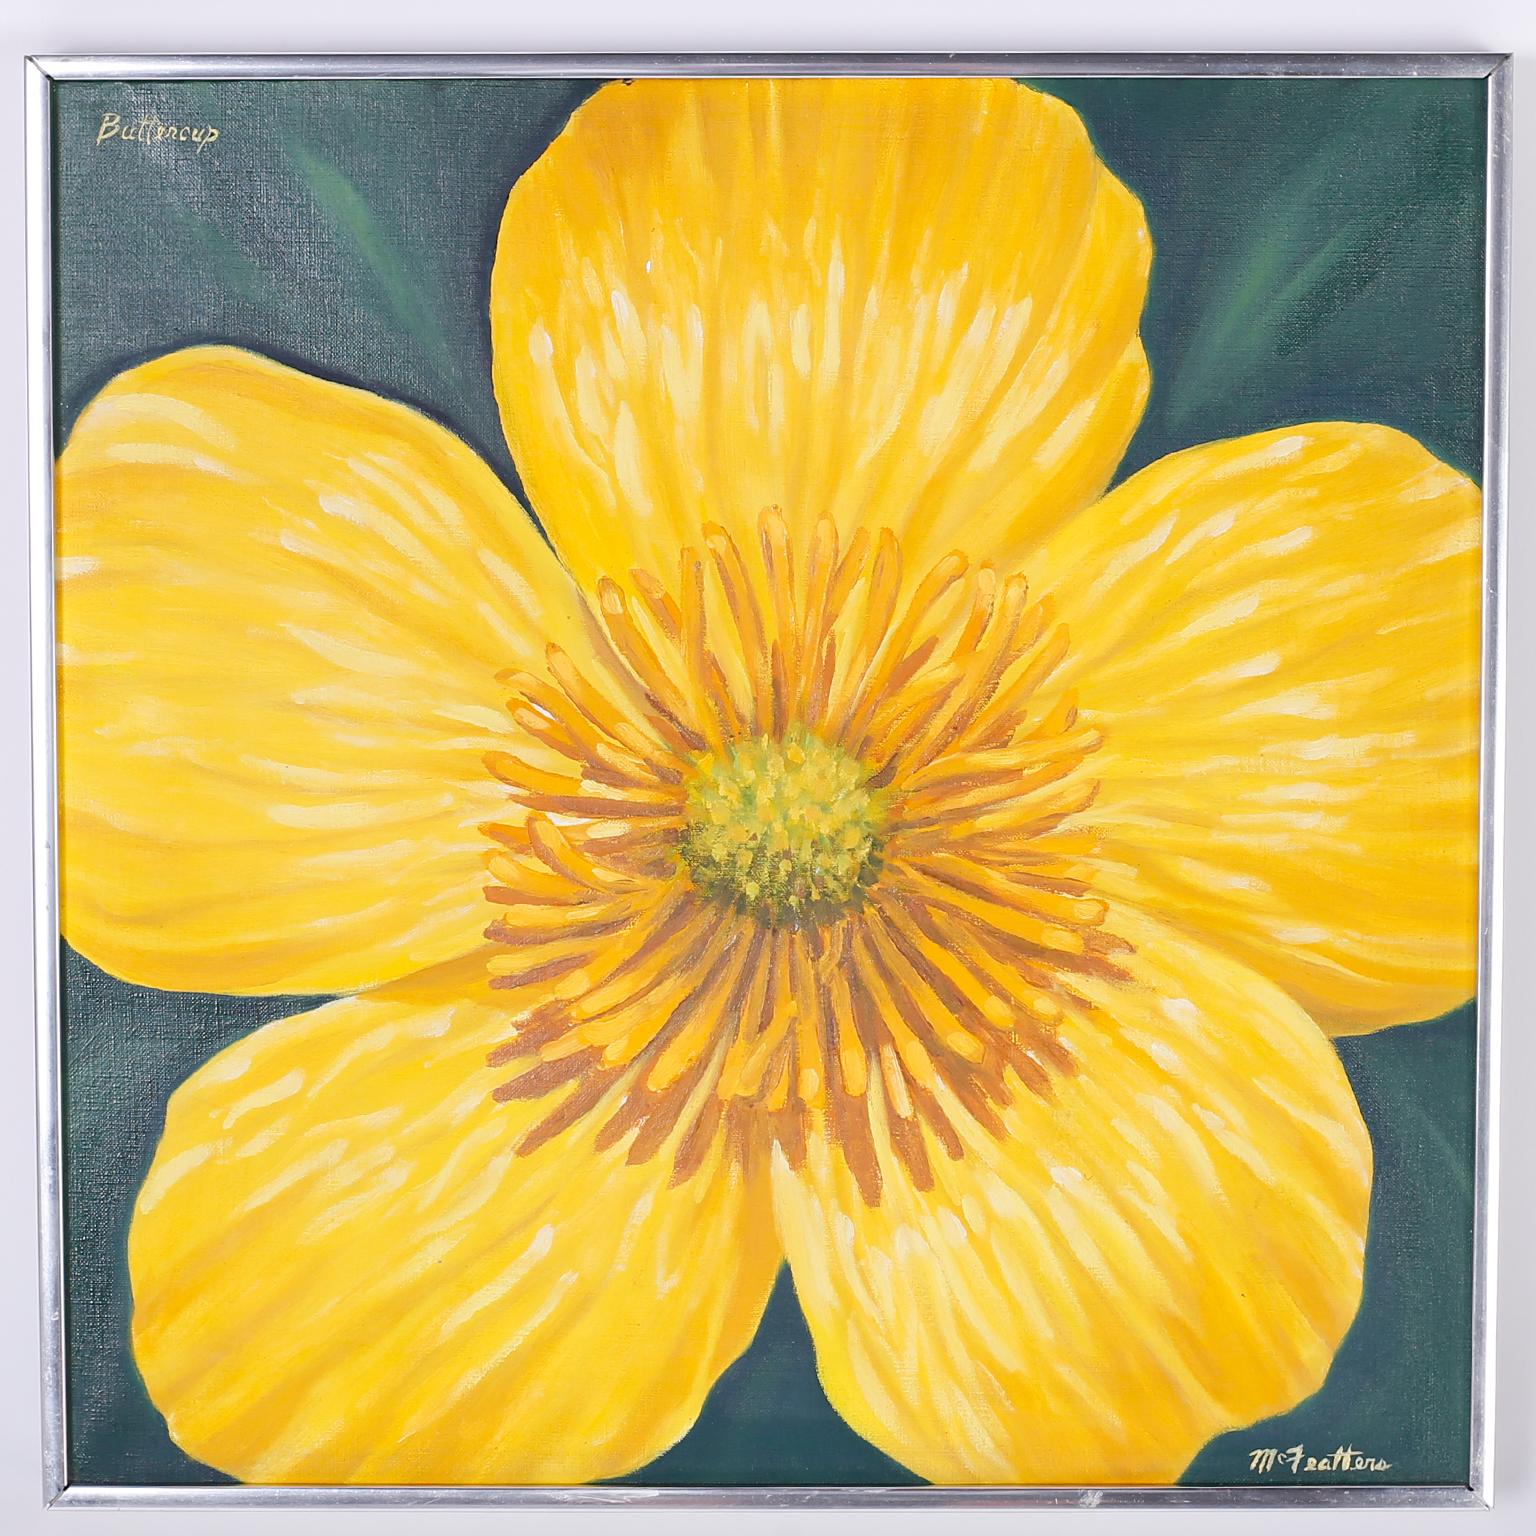 Midcentury flower paintings executed with acrylic on canvas in a bold vibrant style, titled Buttercup and Trout Lilly. Signed McFeatters and presented in the original aluminum frames. Priced individually.